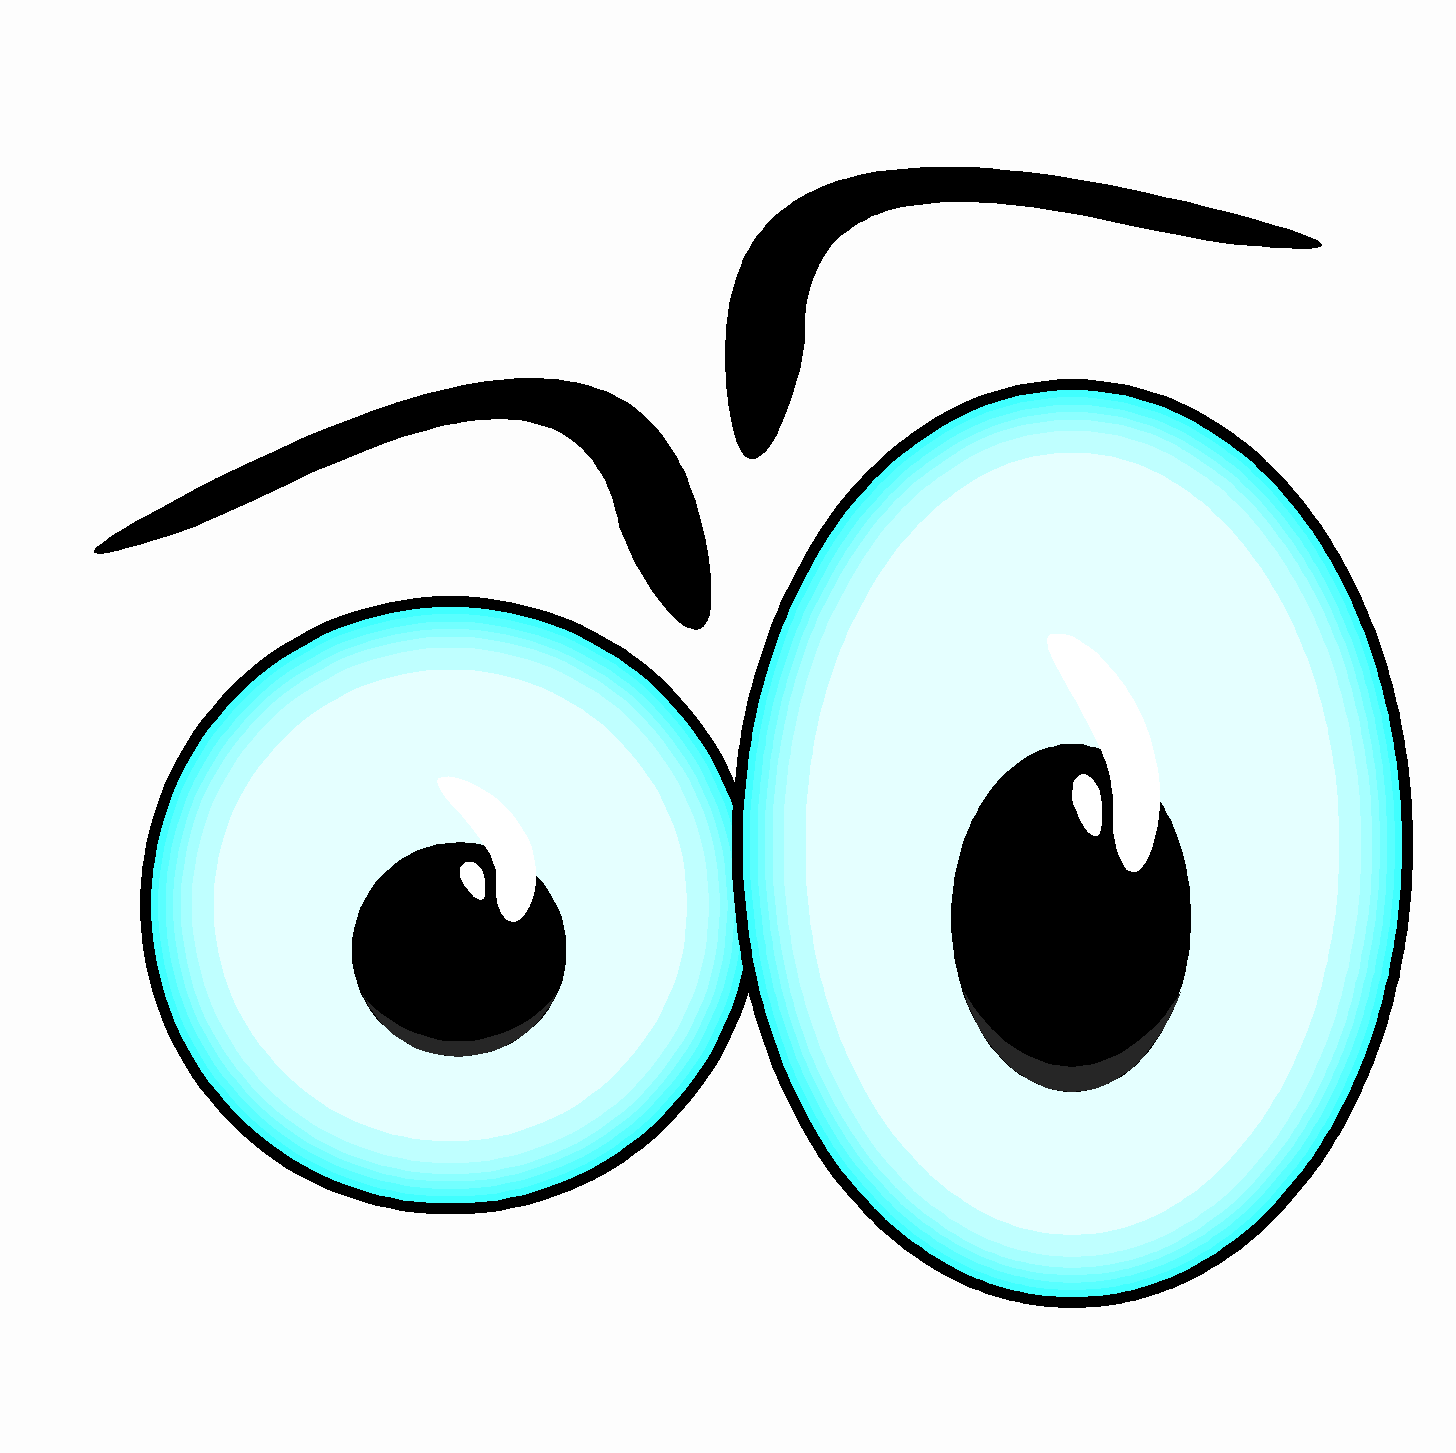 Cartoon Eye Clip Art: Pictures Of Animated Eyes - Photolabels.co ...